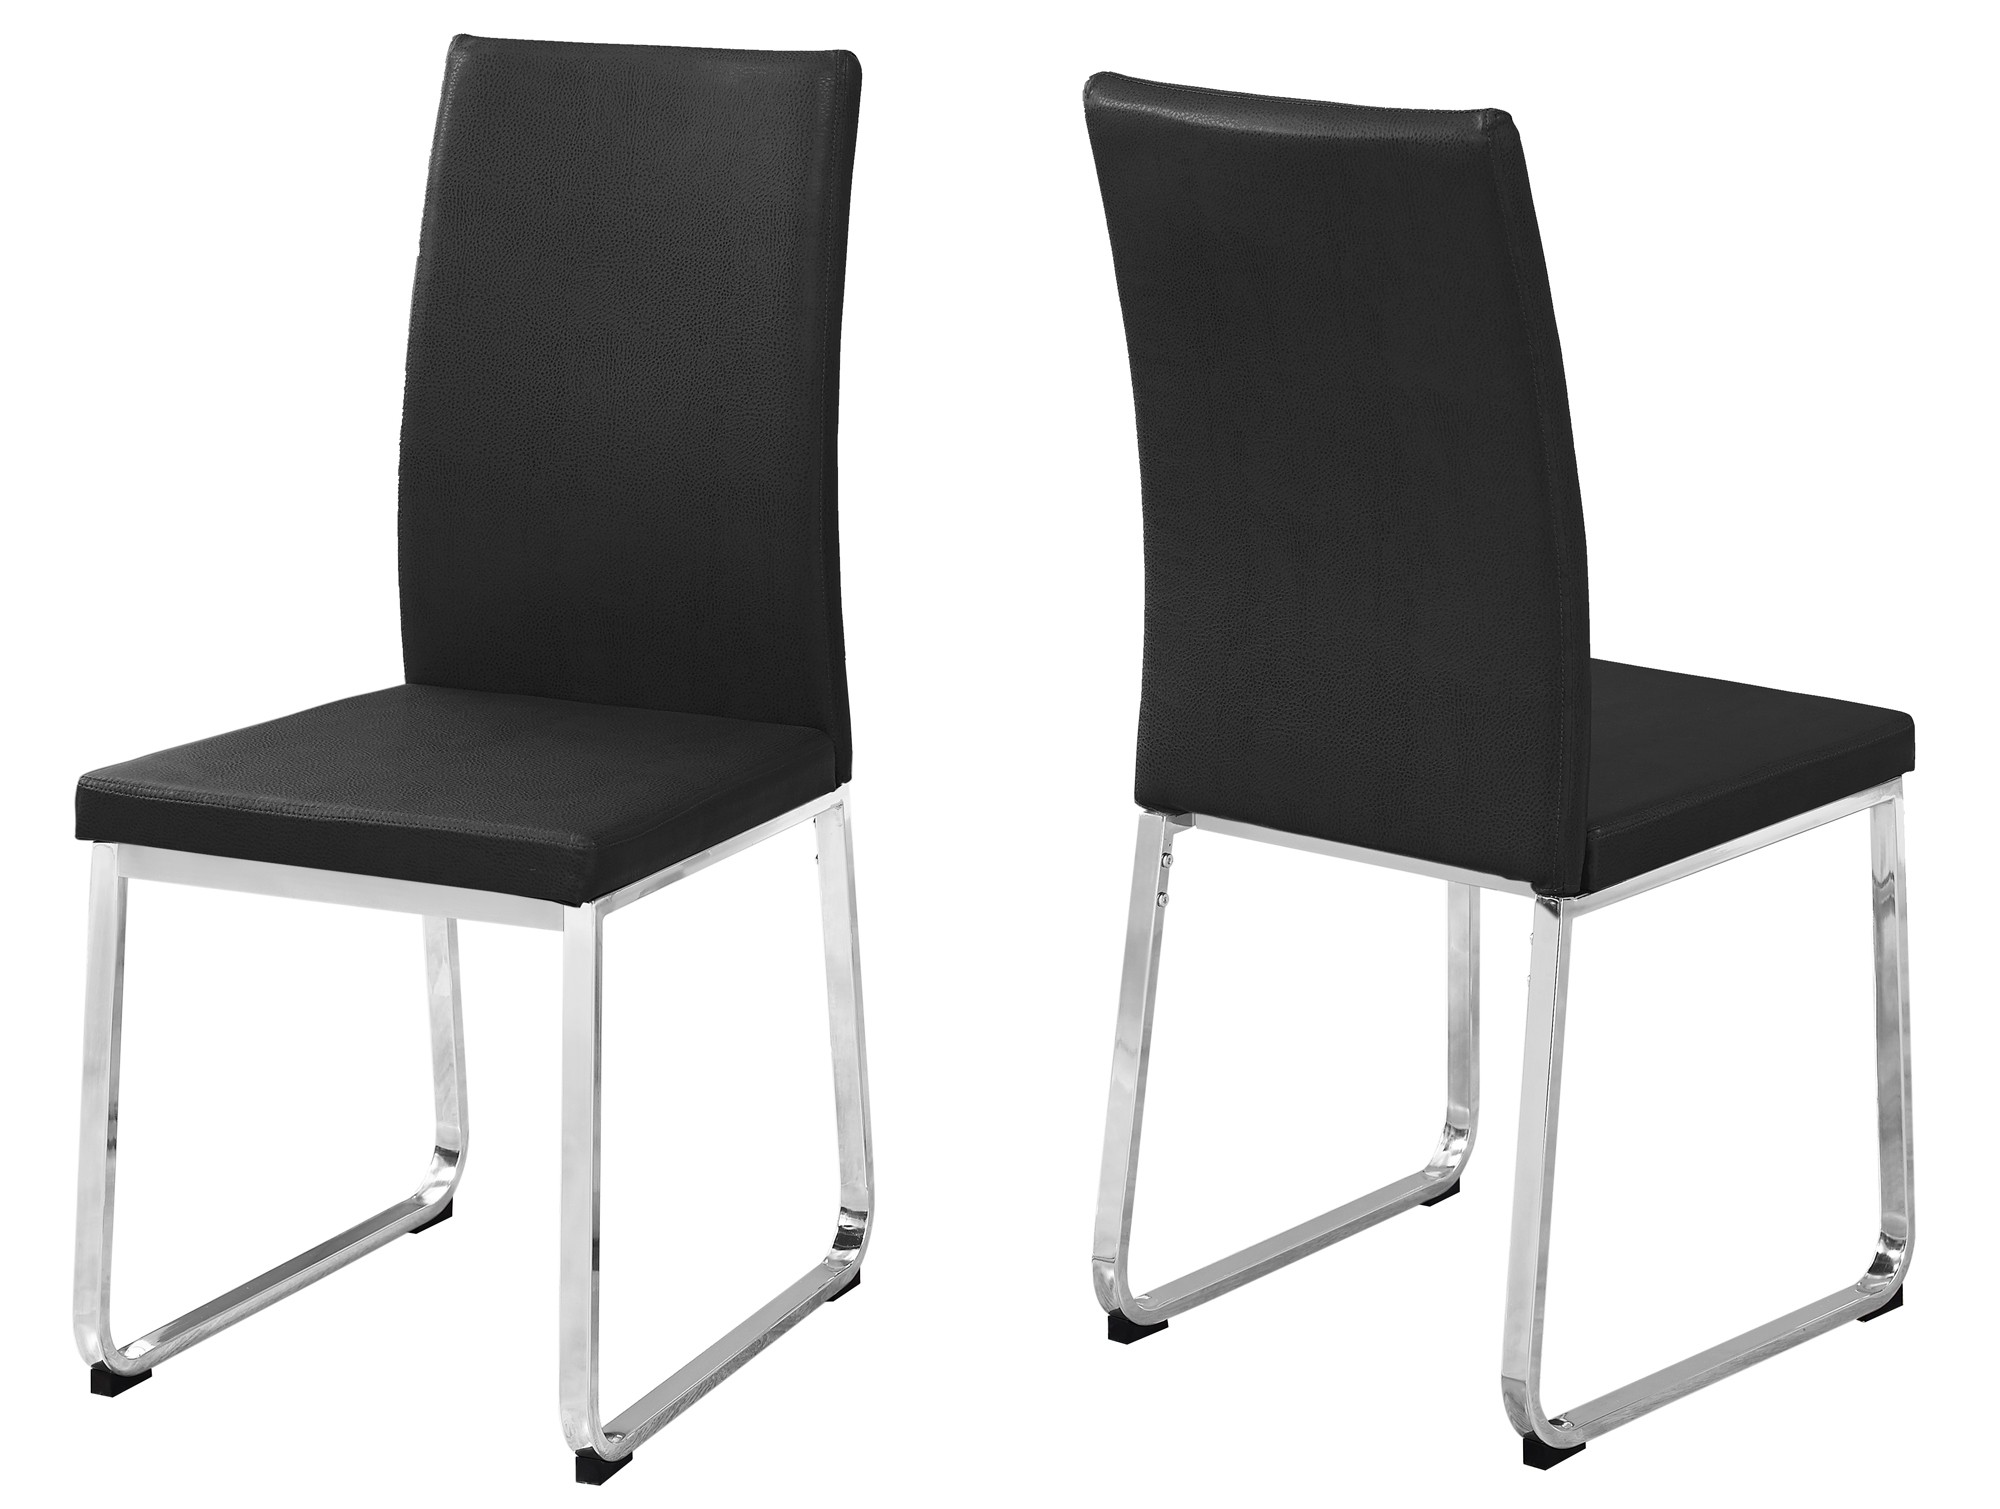 DINING CHAIR - 2PCS / 38"H / BLACK LEATHER-LOOK / CHROME